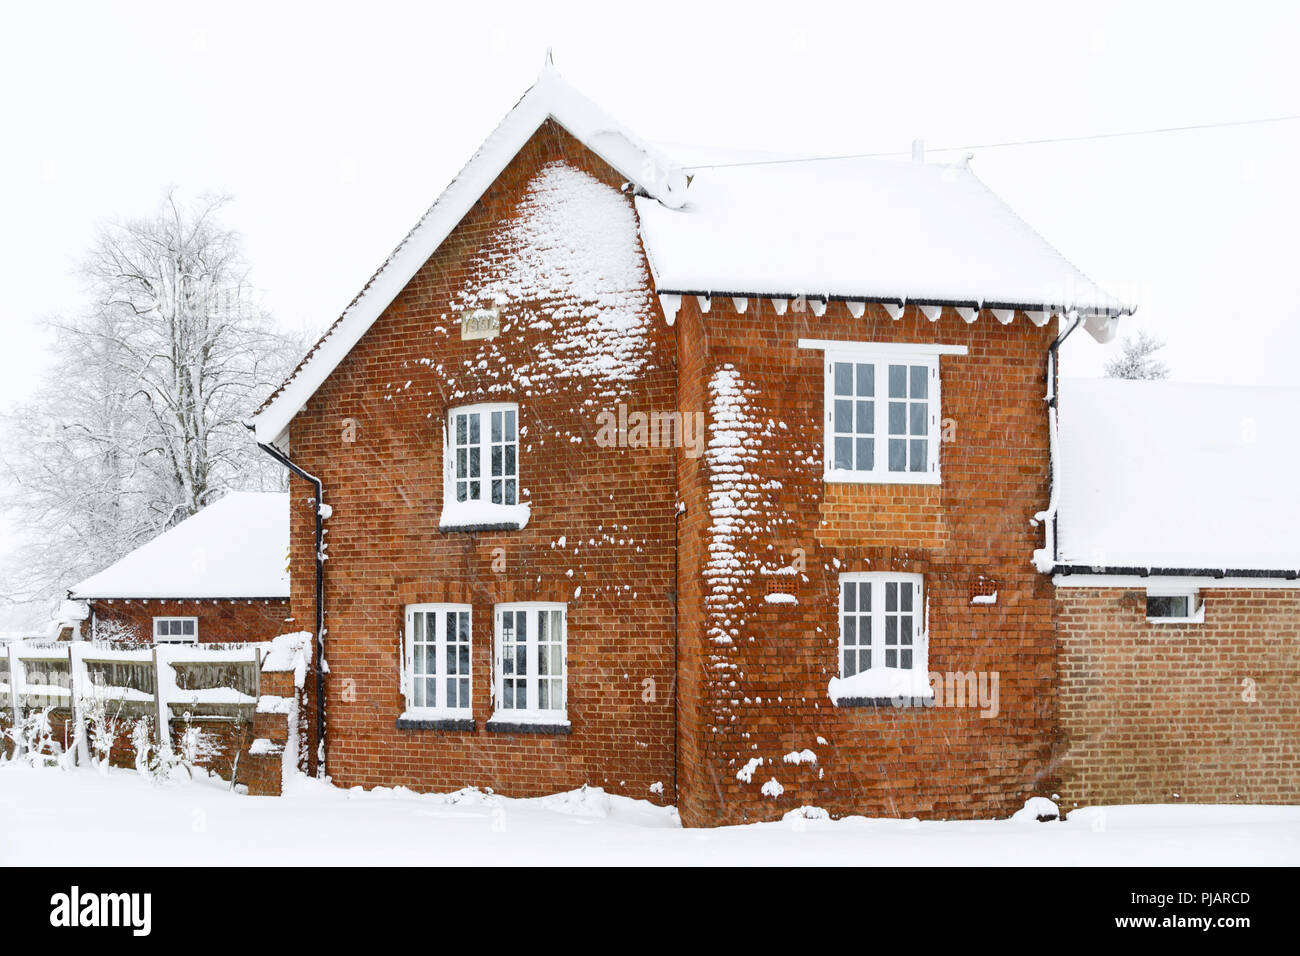 https://c8.alamy.com/comp/PJARCD/old-victorian-house-with-roof-and-brick-walls-covered-in-snow-in-winter-PJARCD.jpg